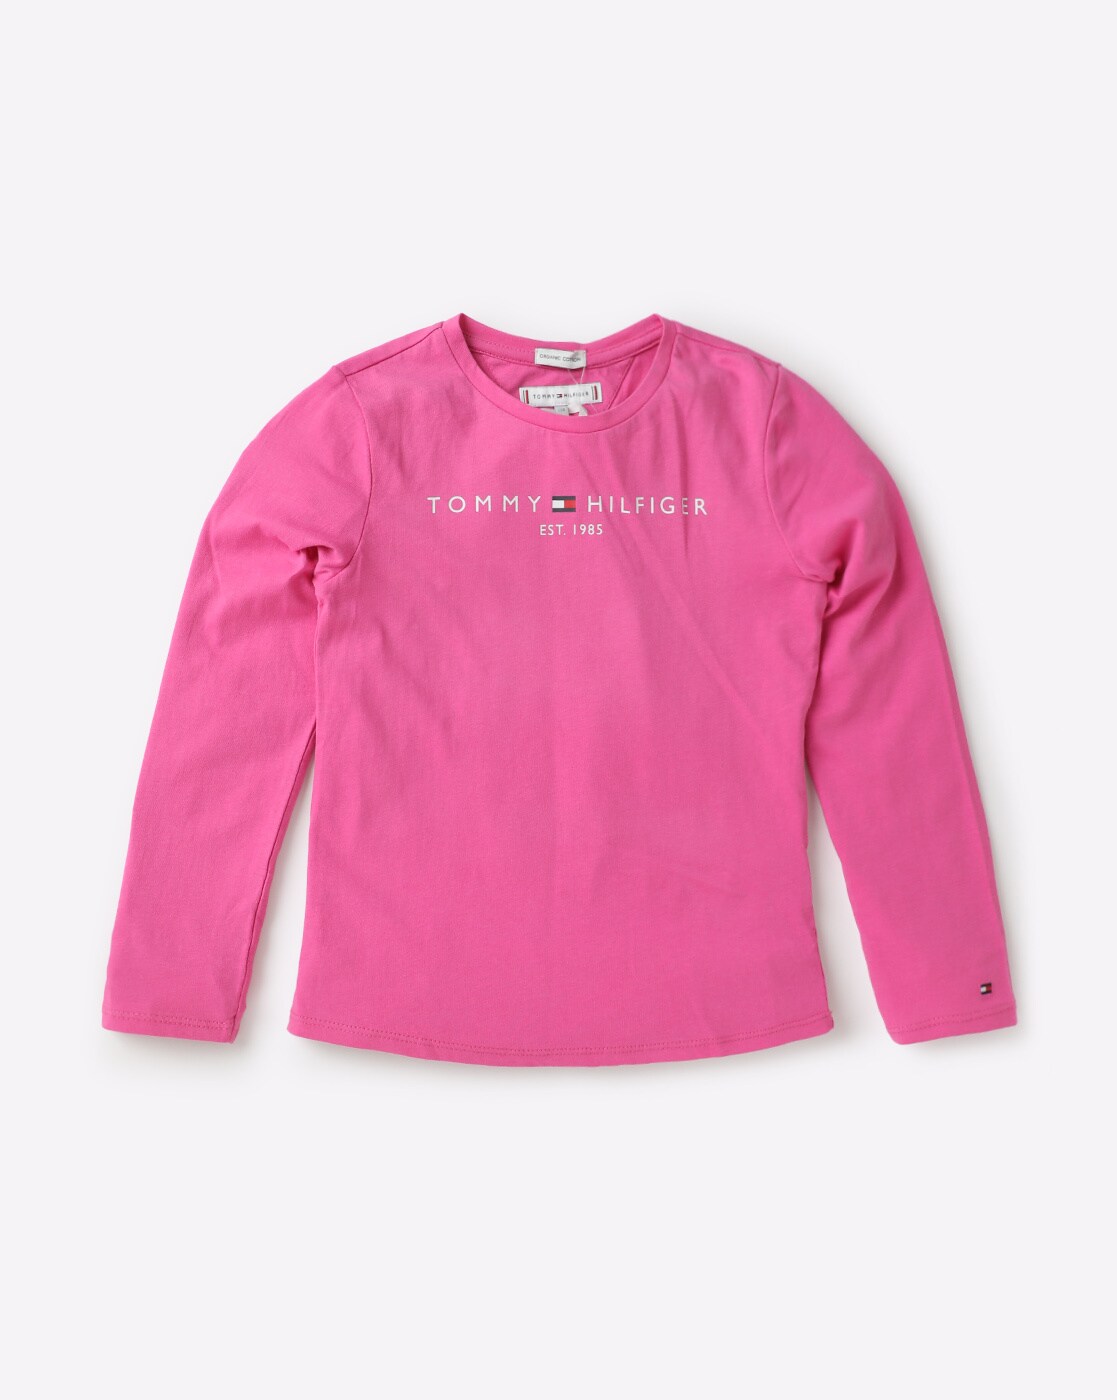 Pink Tshirts Buy TOMMY Girls by HILFIGER for Online